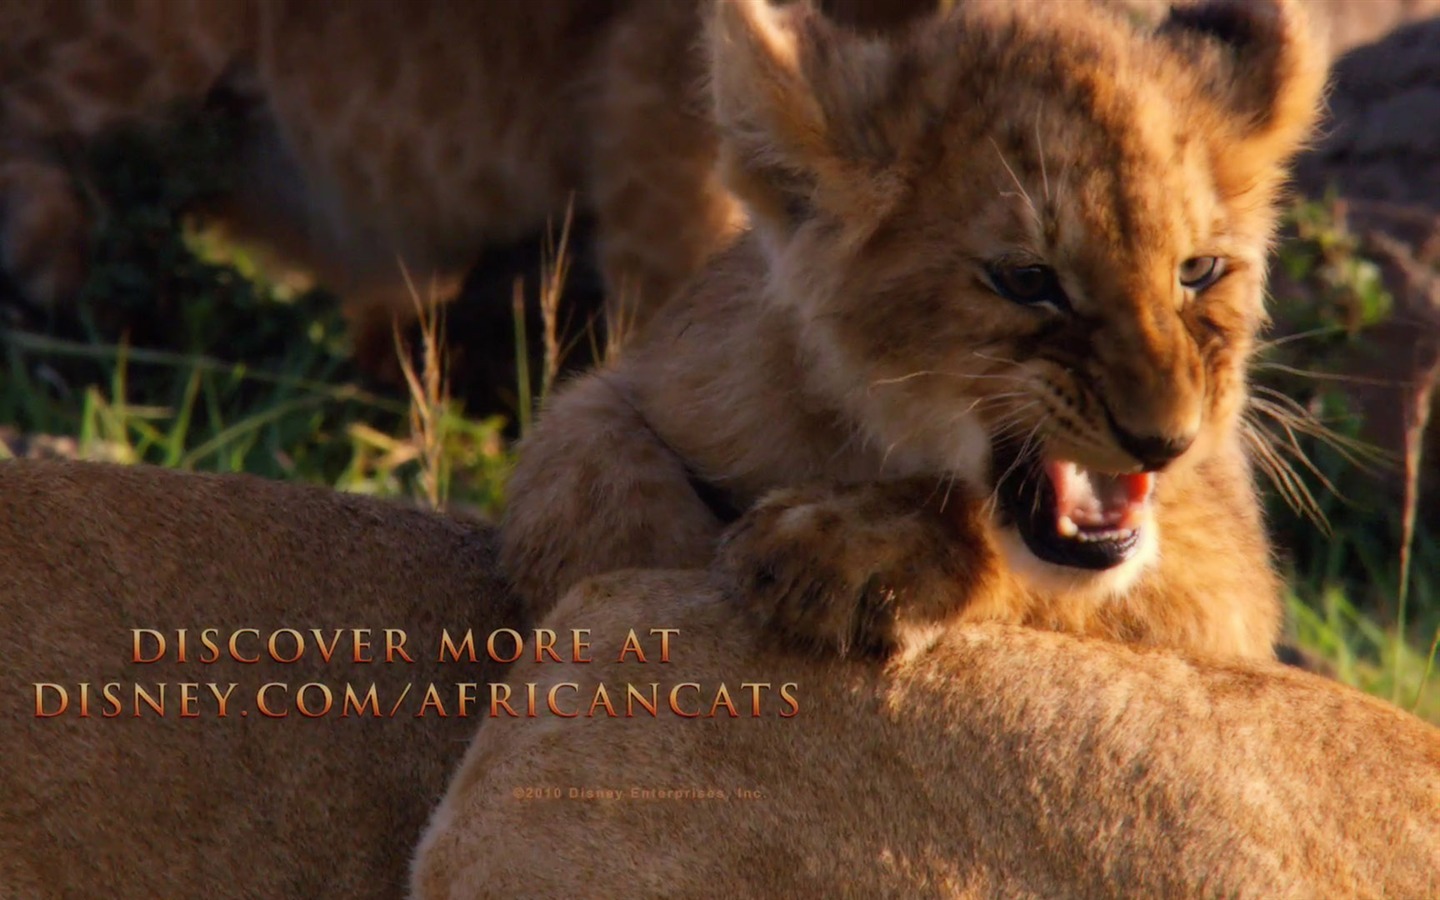 African Cats: Kingdom of Courage wallpapers #12 - 1440x900